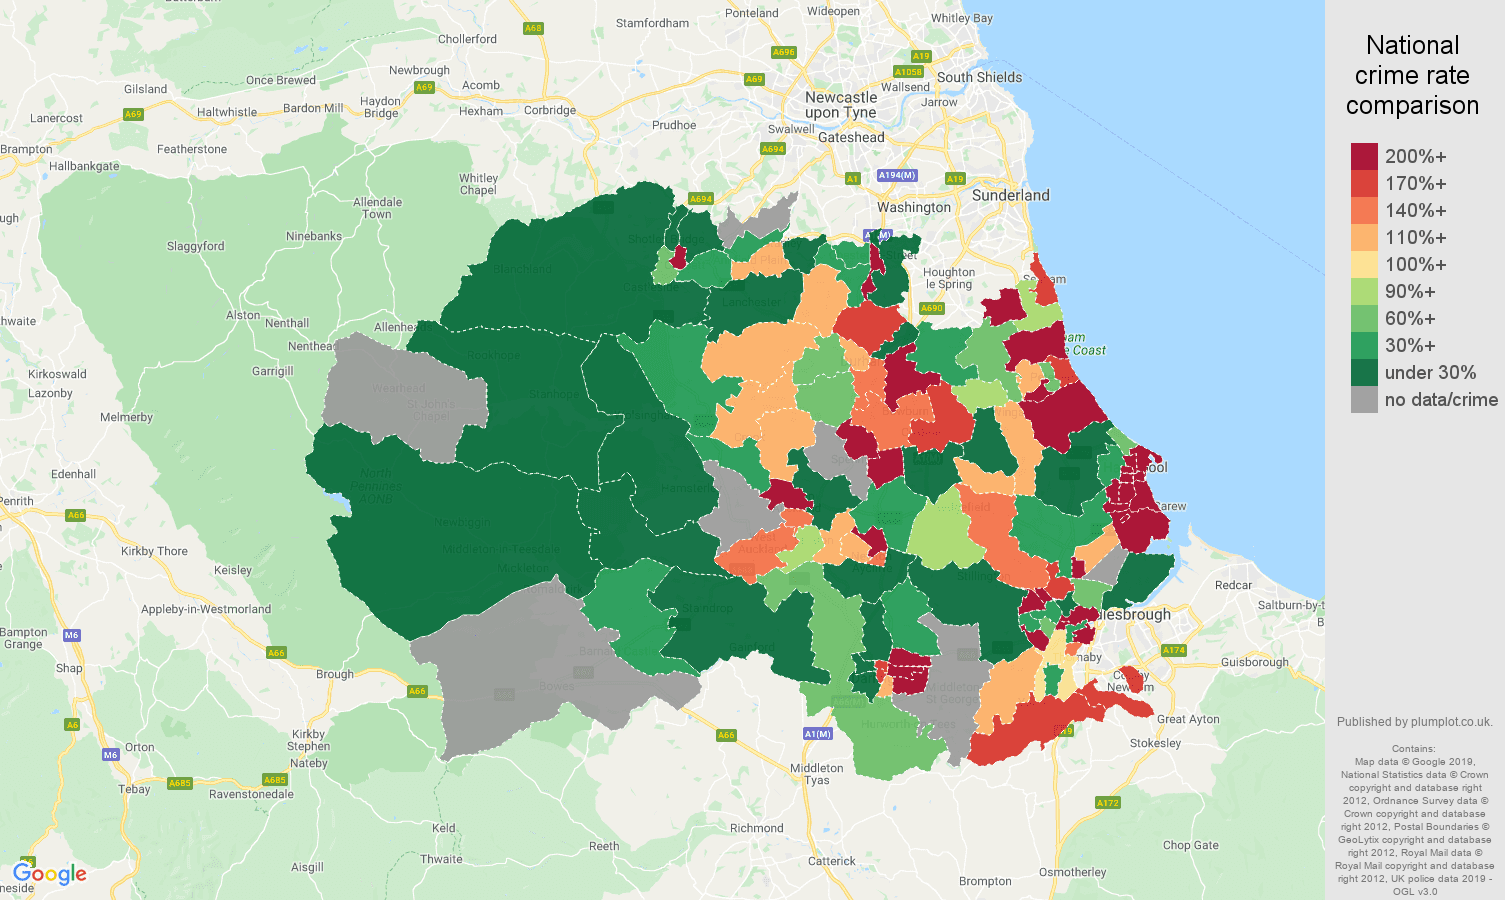 Durham county shoplifting crime rate comparison map